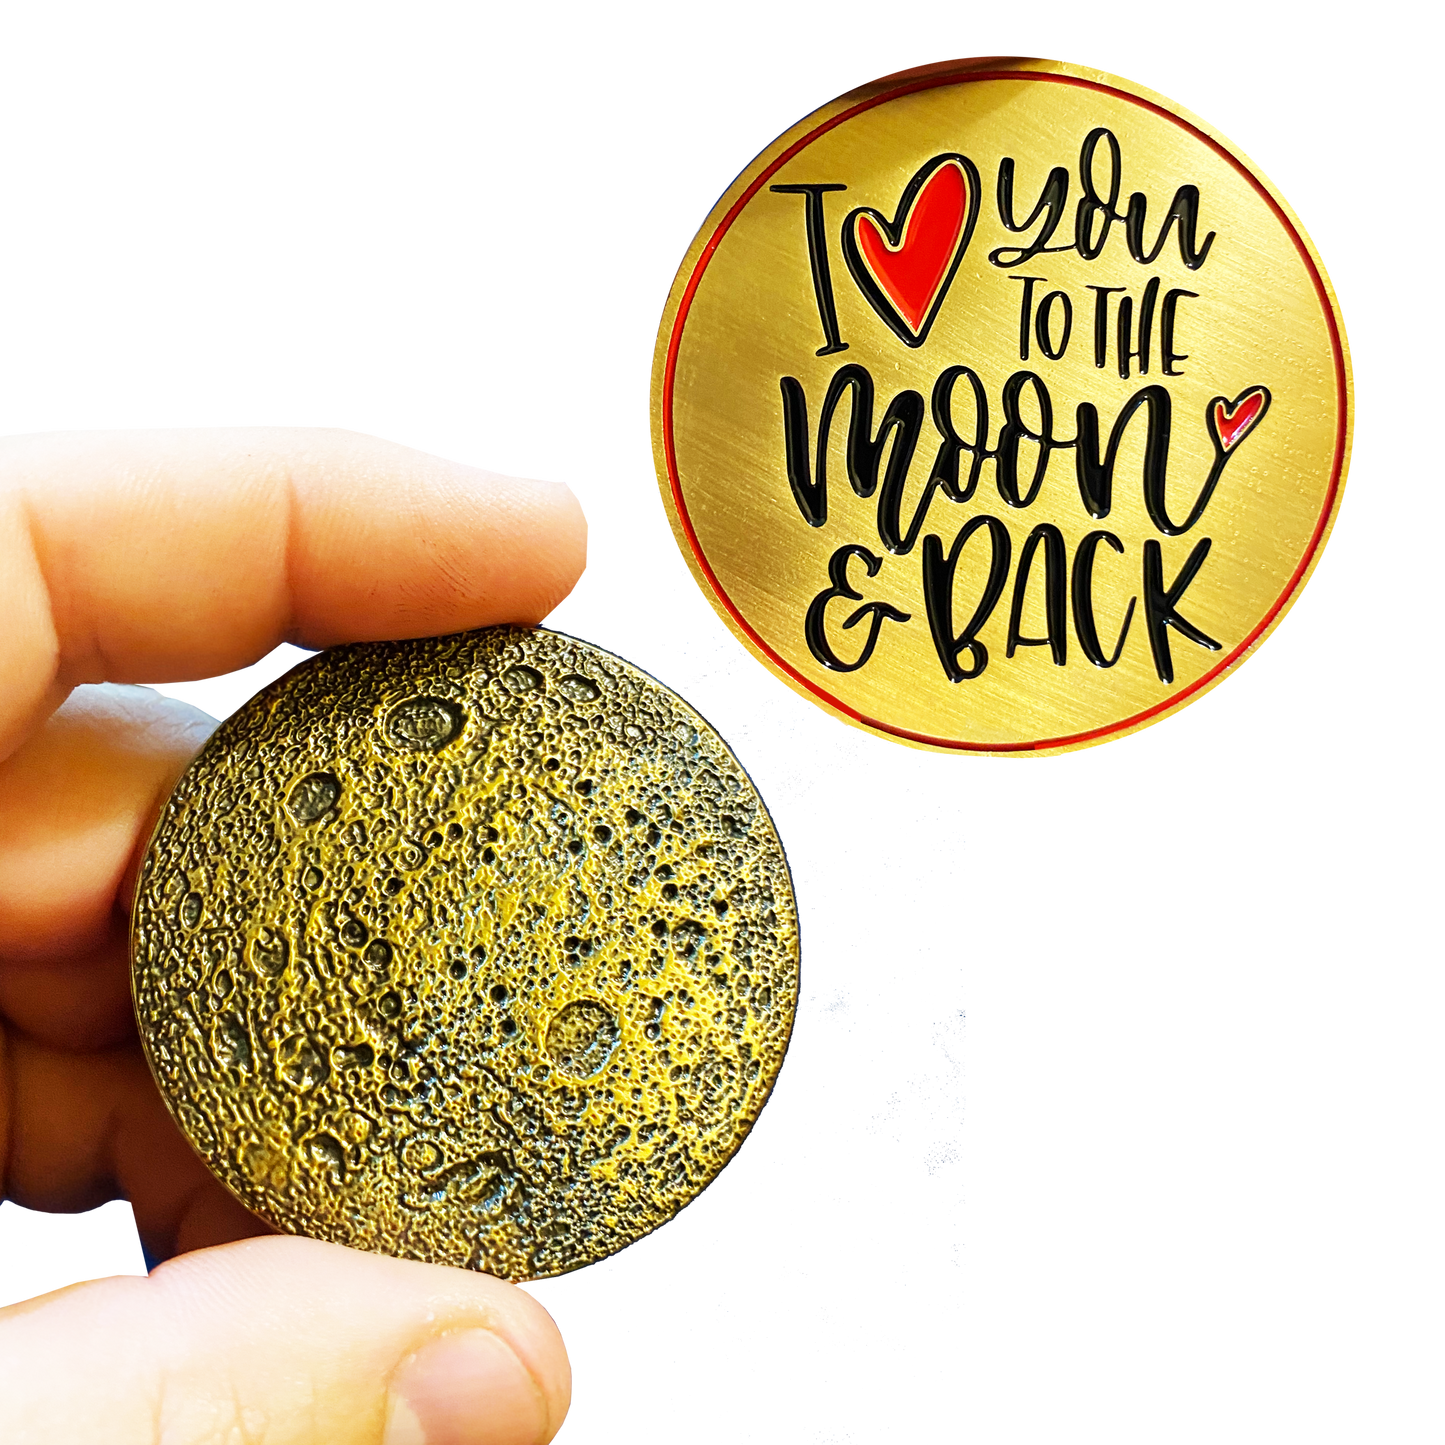 AA-019 I Love You to the Moon and Back Heart Challenge Coin Medallion with 3D Moon